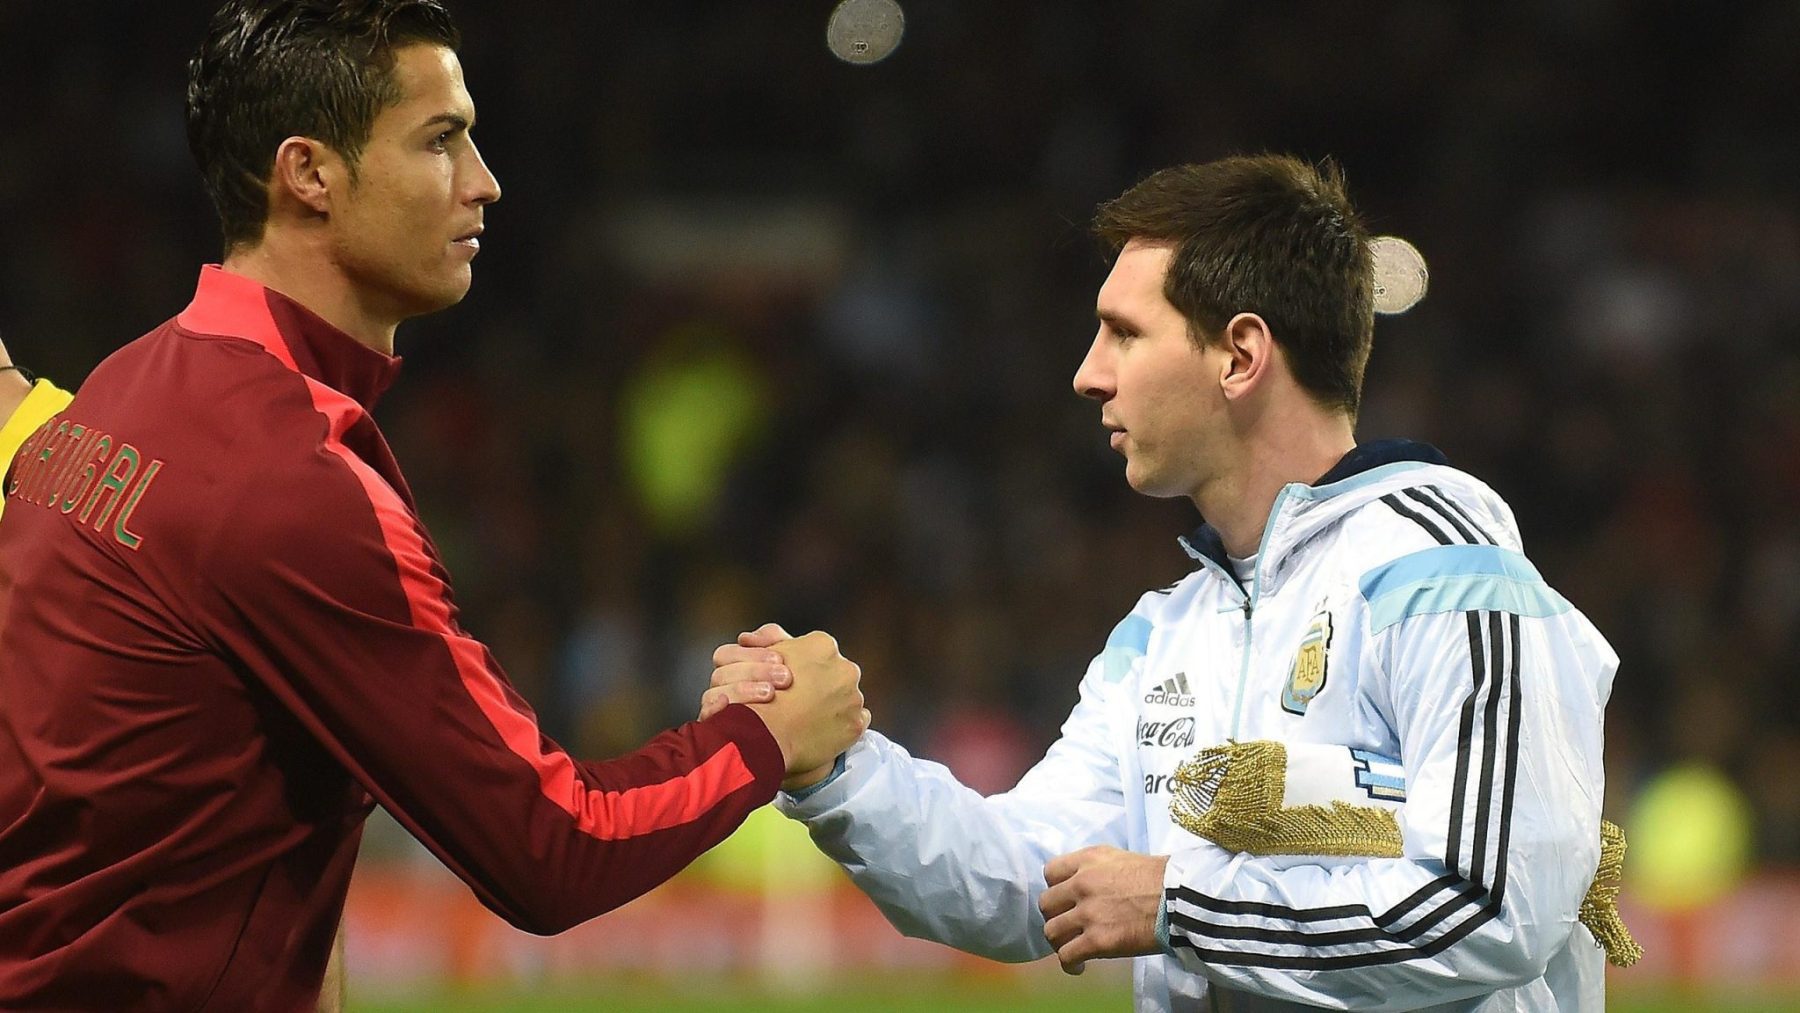 Ronaldo stands out in football' - Barcelona star Messi salutes